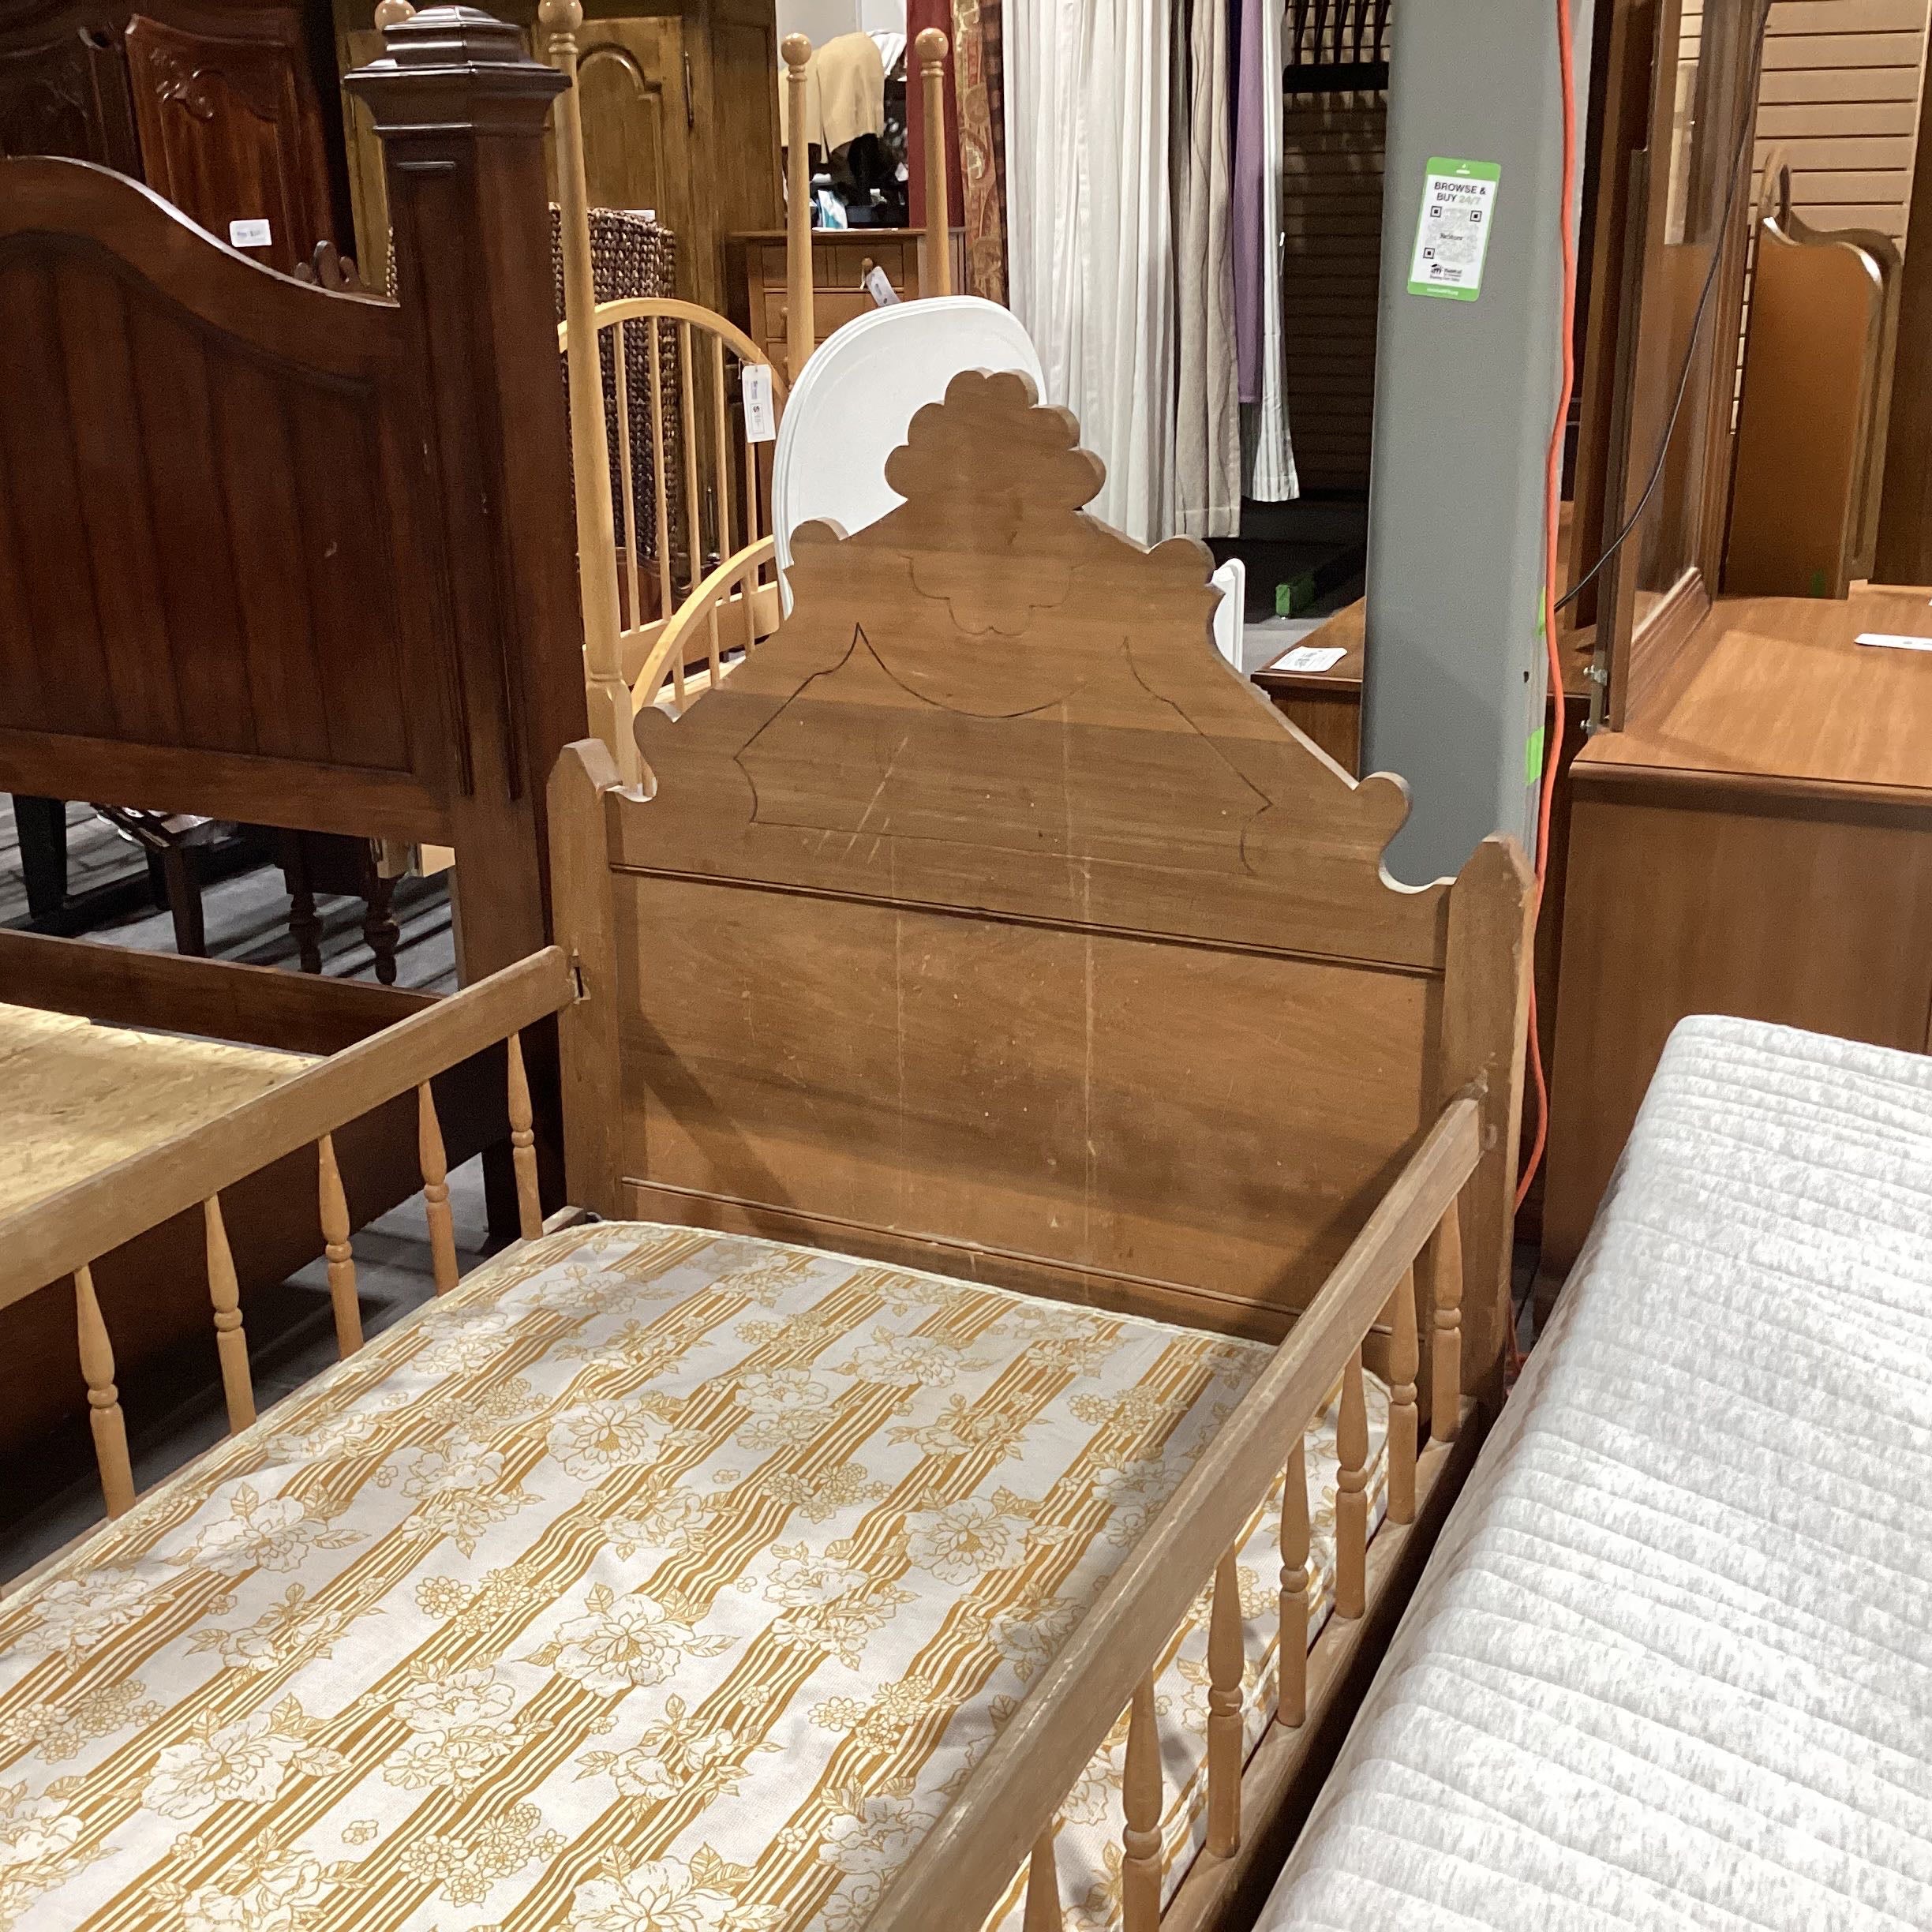 Antique Toddler Bed with Mattress Bedset